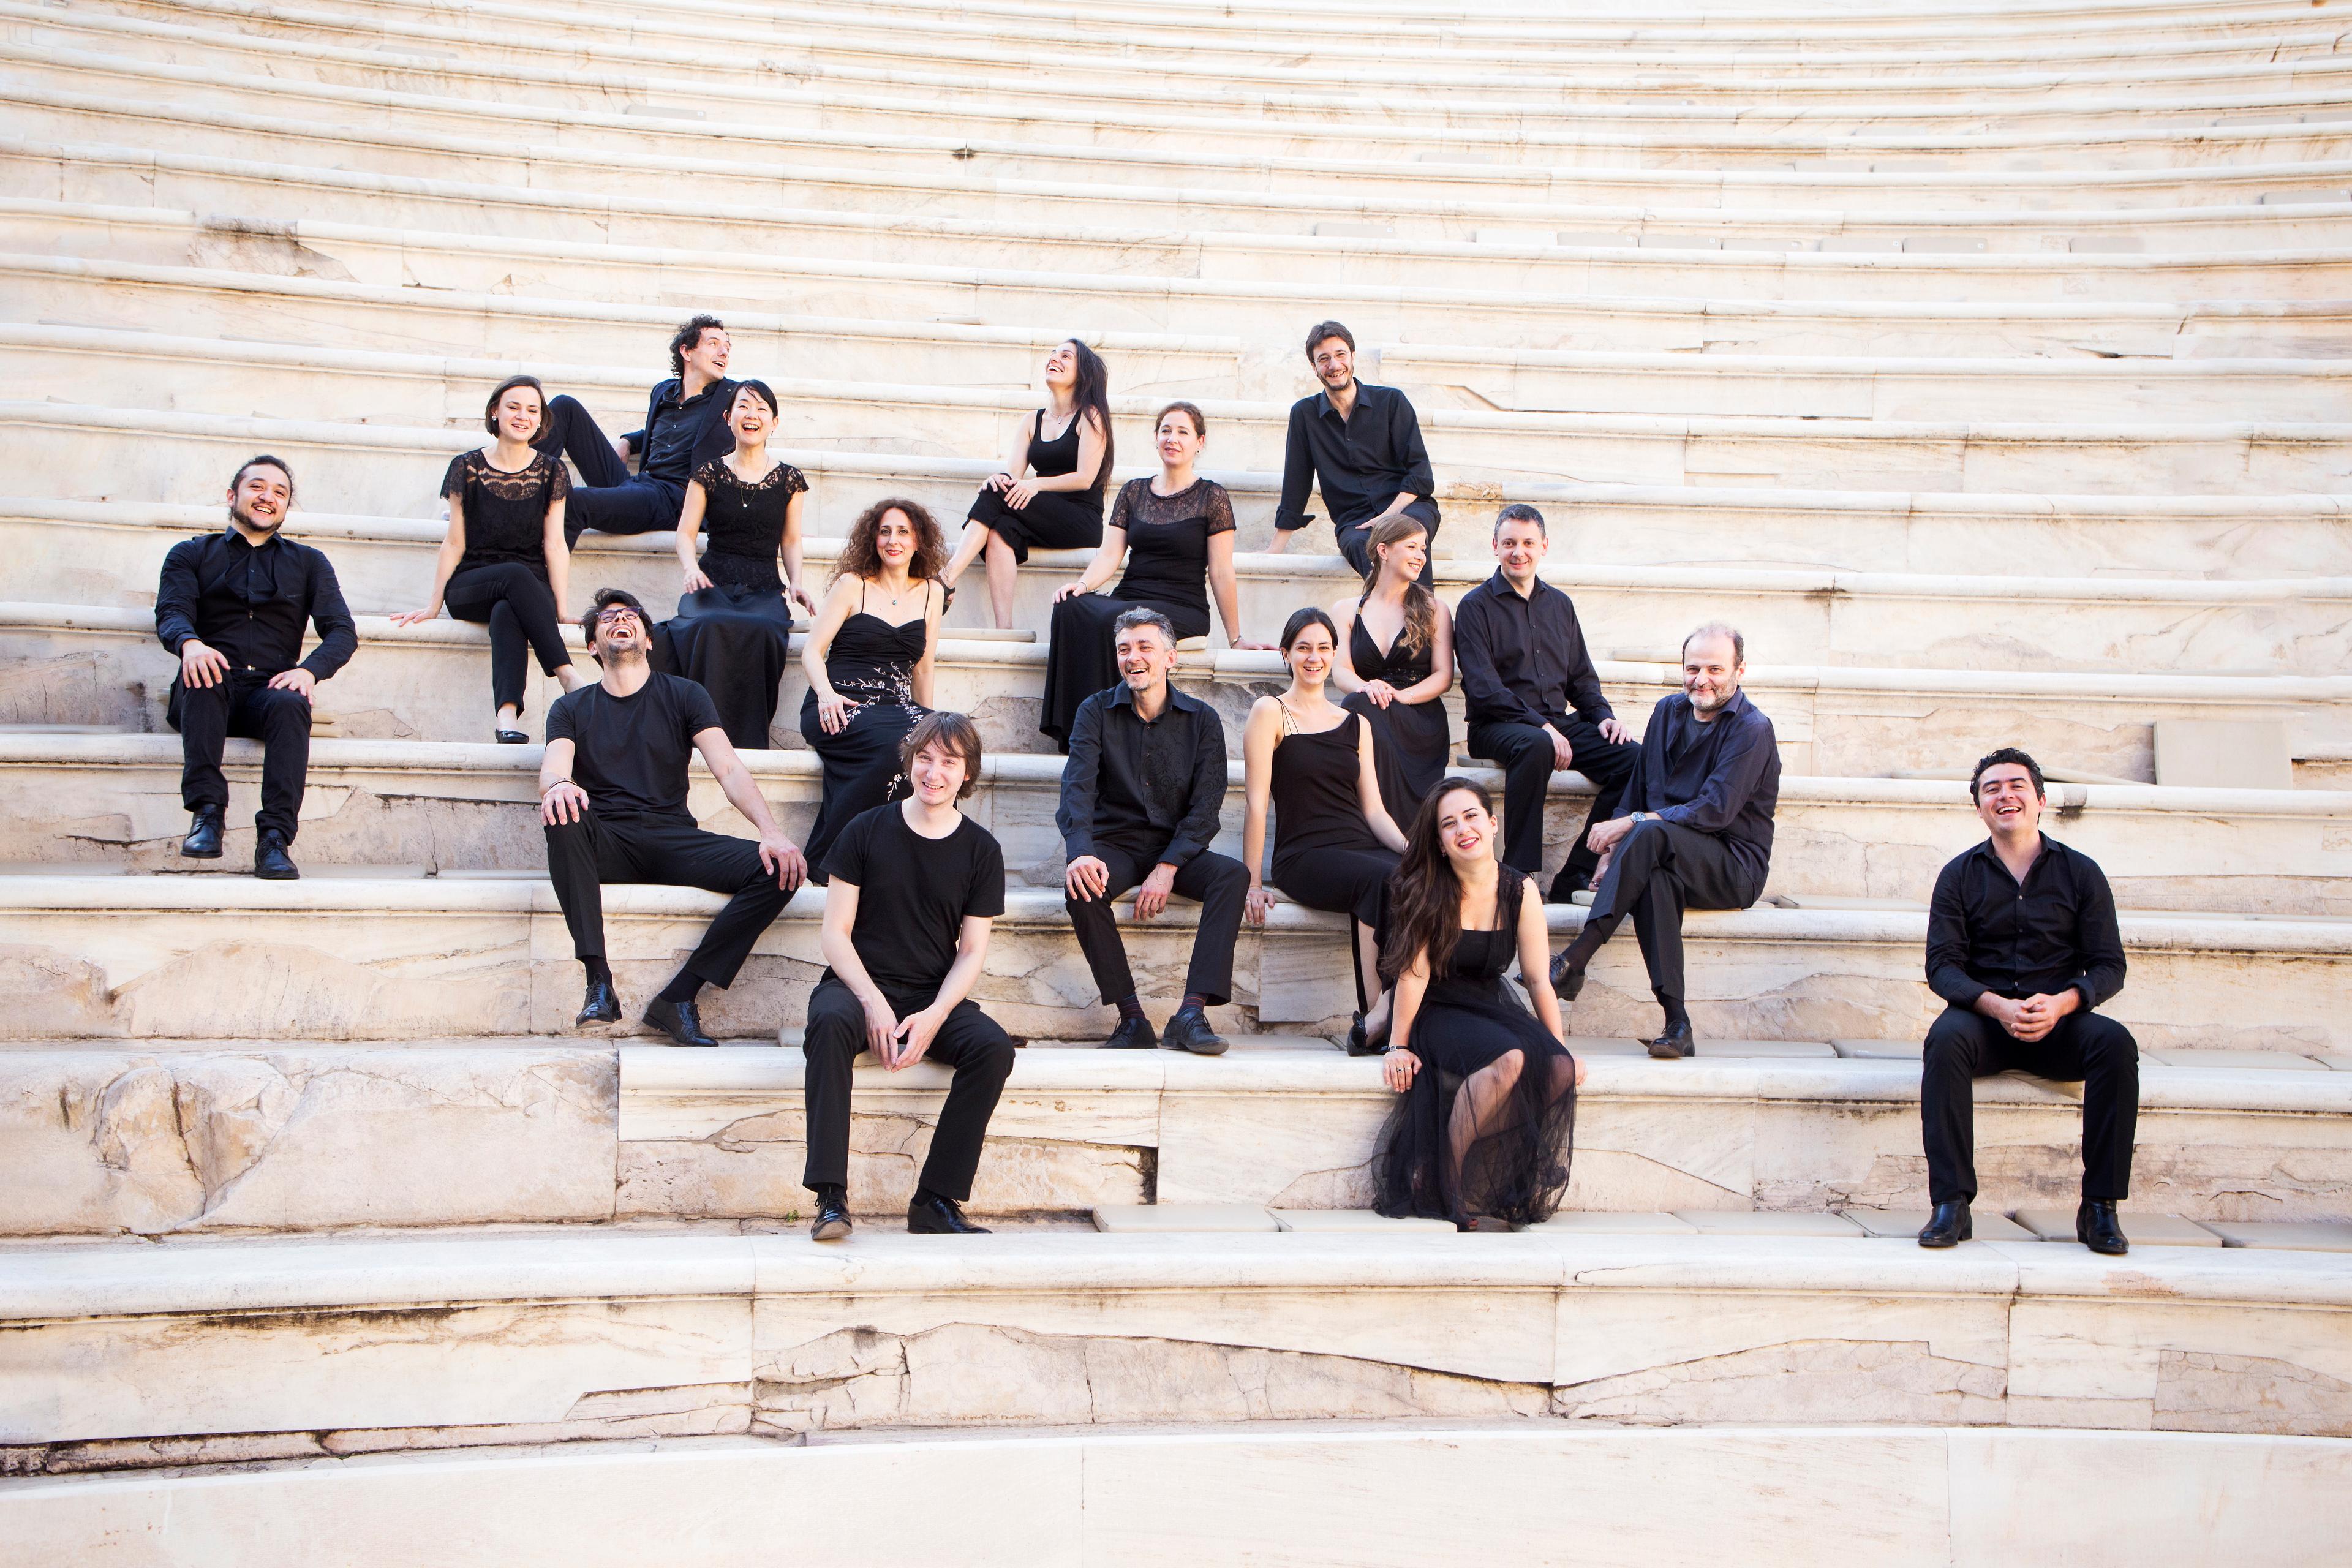 Musicians of the ensemble posing on the stairs on an outdoor Roman theatre